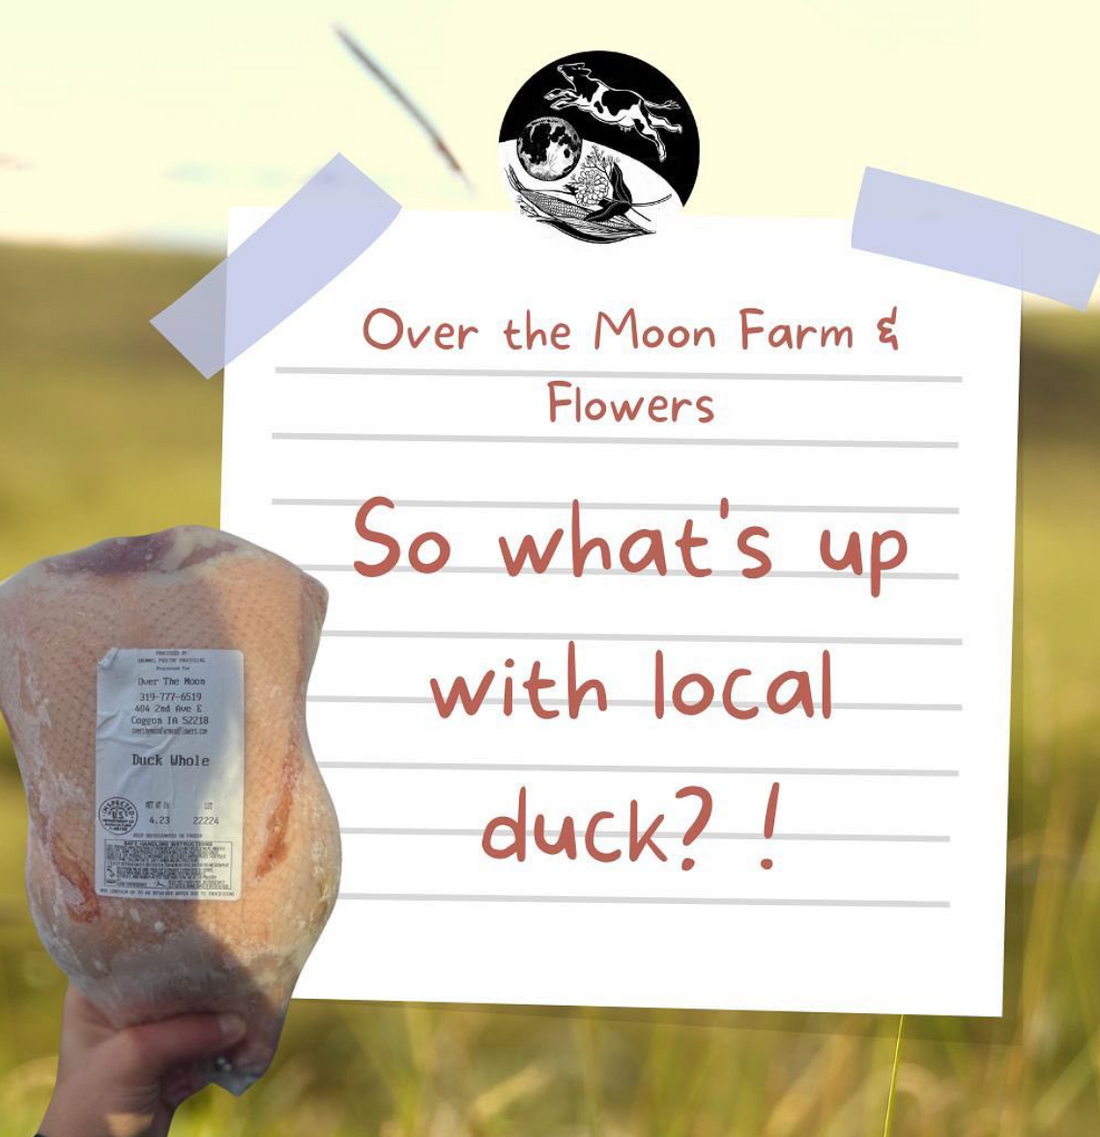 So What's Up with Local Duck?!